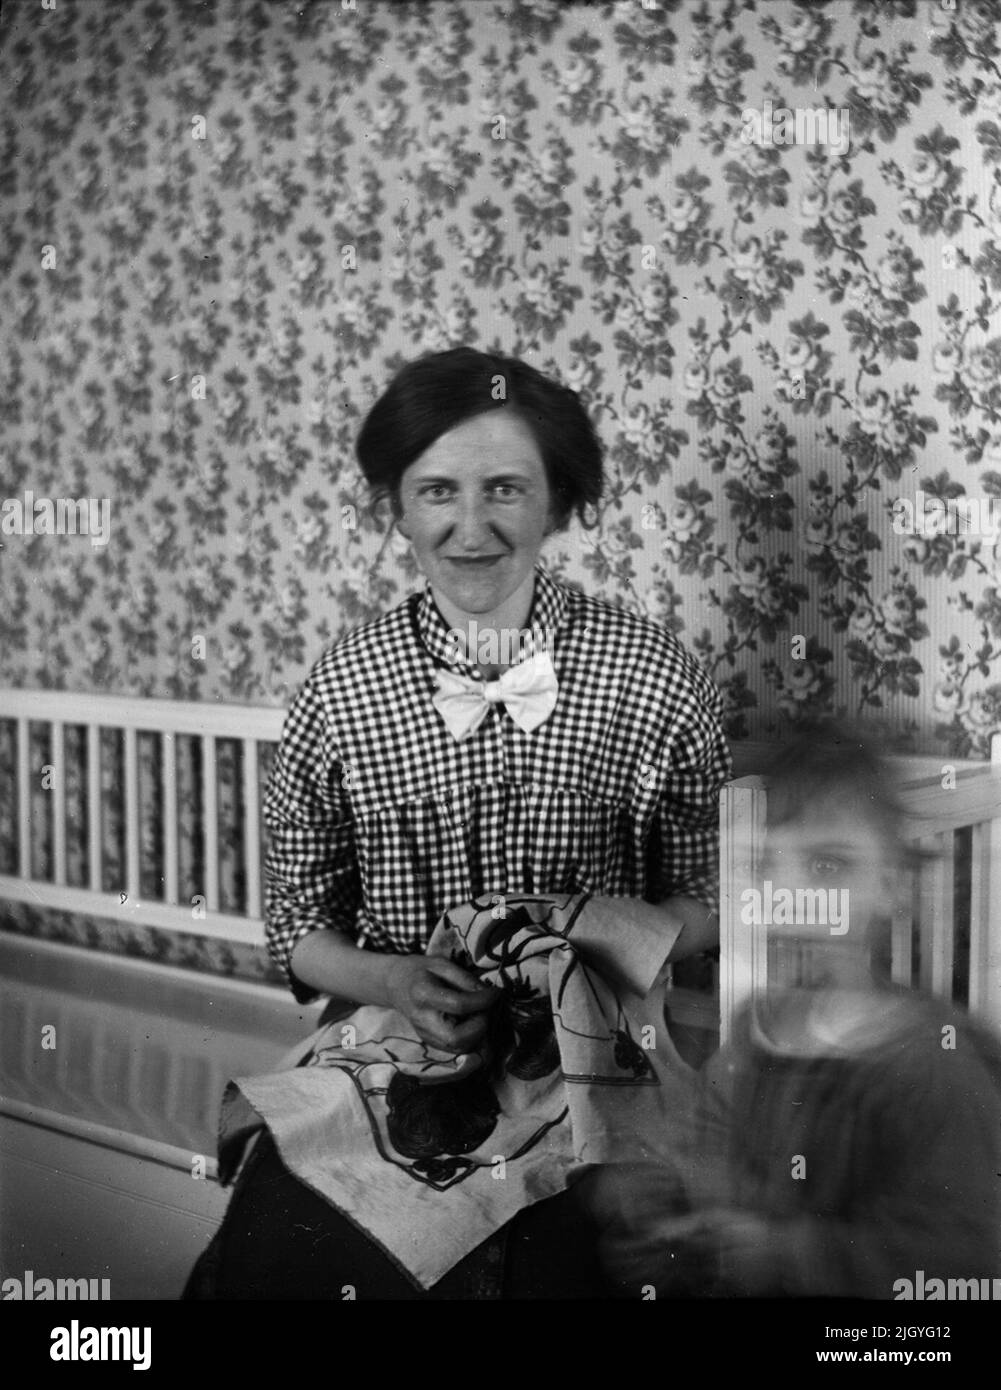 Nora Ärnström with embroidery work. To the right, a child who does not want to be still. Josef Ärnström's image collection was acquired by the Upplands Museum 2011.josef Ärnström was born in 1887 in Keep, Hållnäs parish, Uppland. He was married to Nora Selldin, born in Timrå, Medelpad. Both Josef and his wife Nora took their degrees around 1910 at the teacher's seminar in Uppsala. In Medelpad, the couple received their first teacher services at Berge school as a newlyweds about 1910-12. The relocation then moved on to Lapland where Josef was employed in Toulleuvaara between about 1913-18. Jose Stock Photo